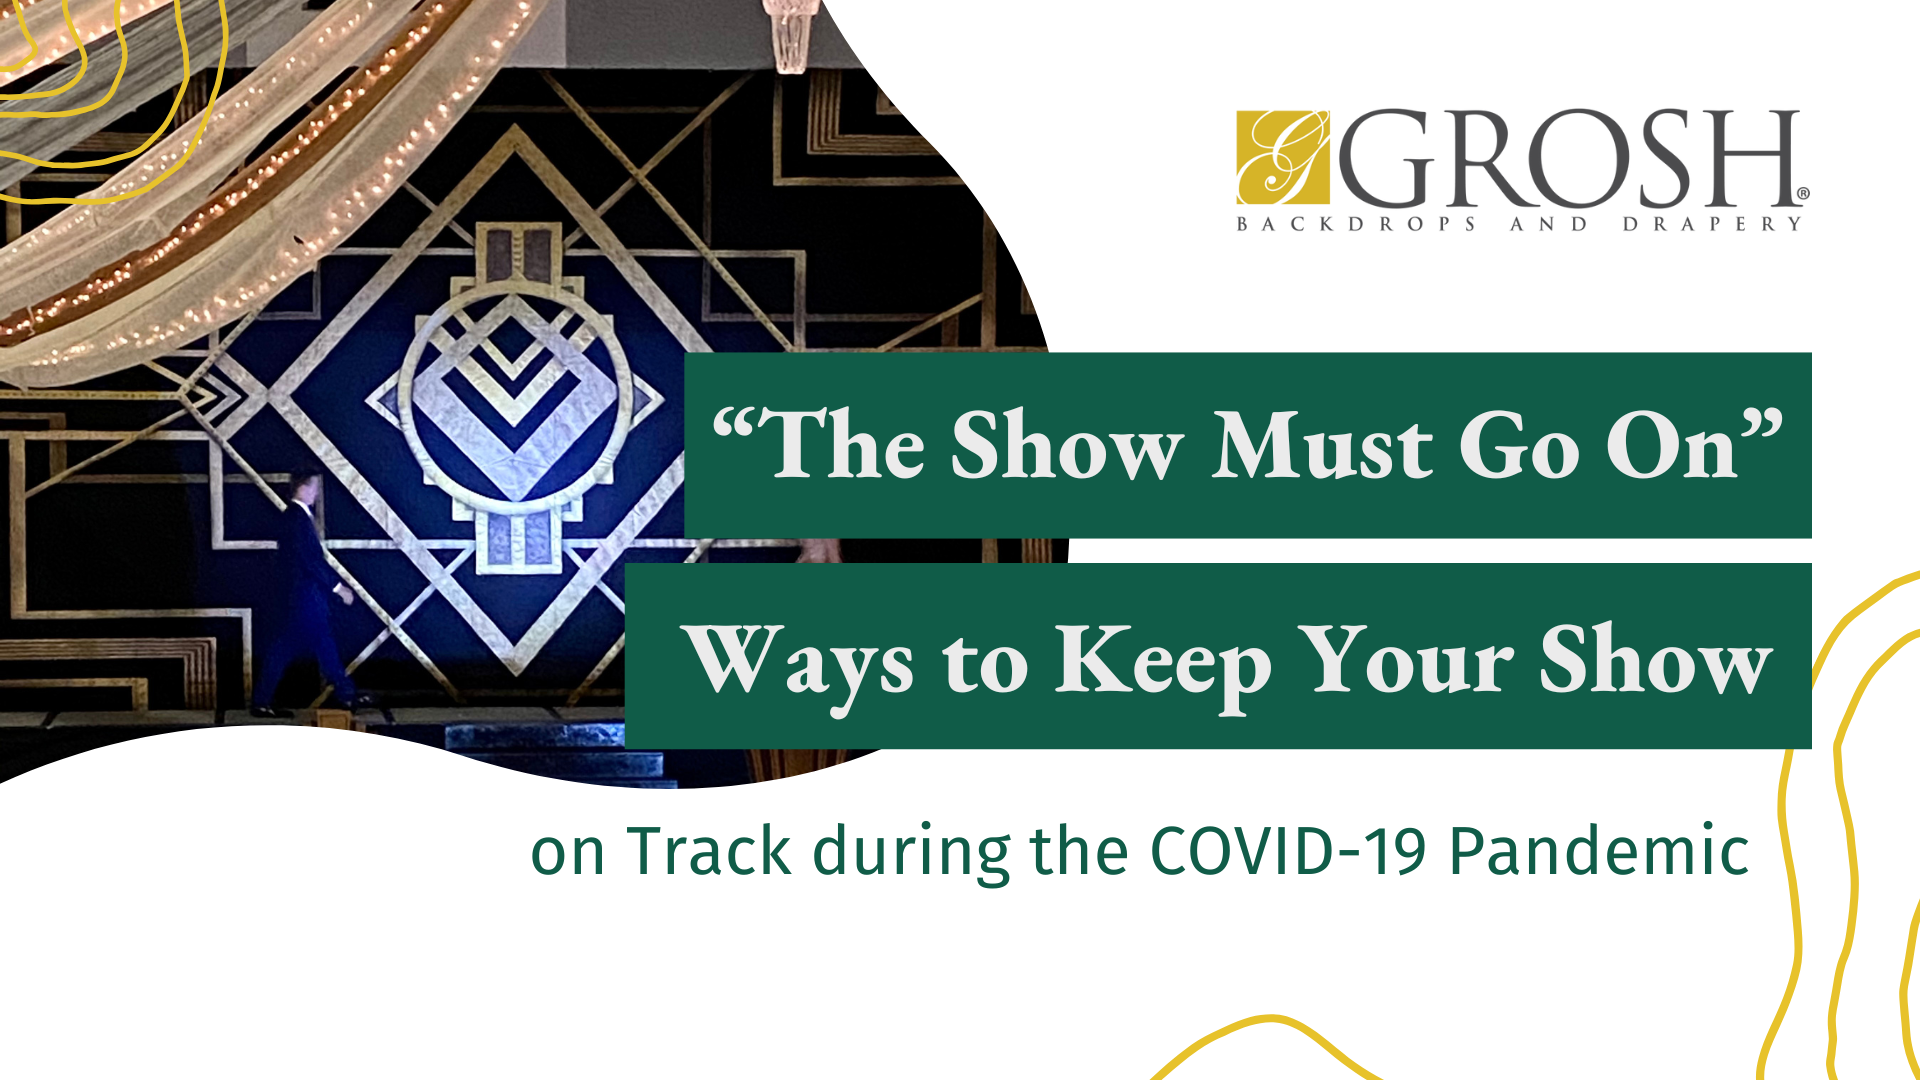 The Show Must Go On – Ways to Keep Your Show on Track during the COVID 19 Pandemic